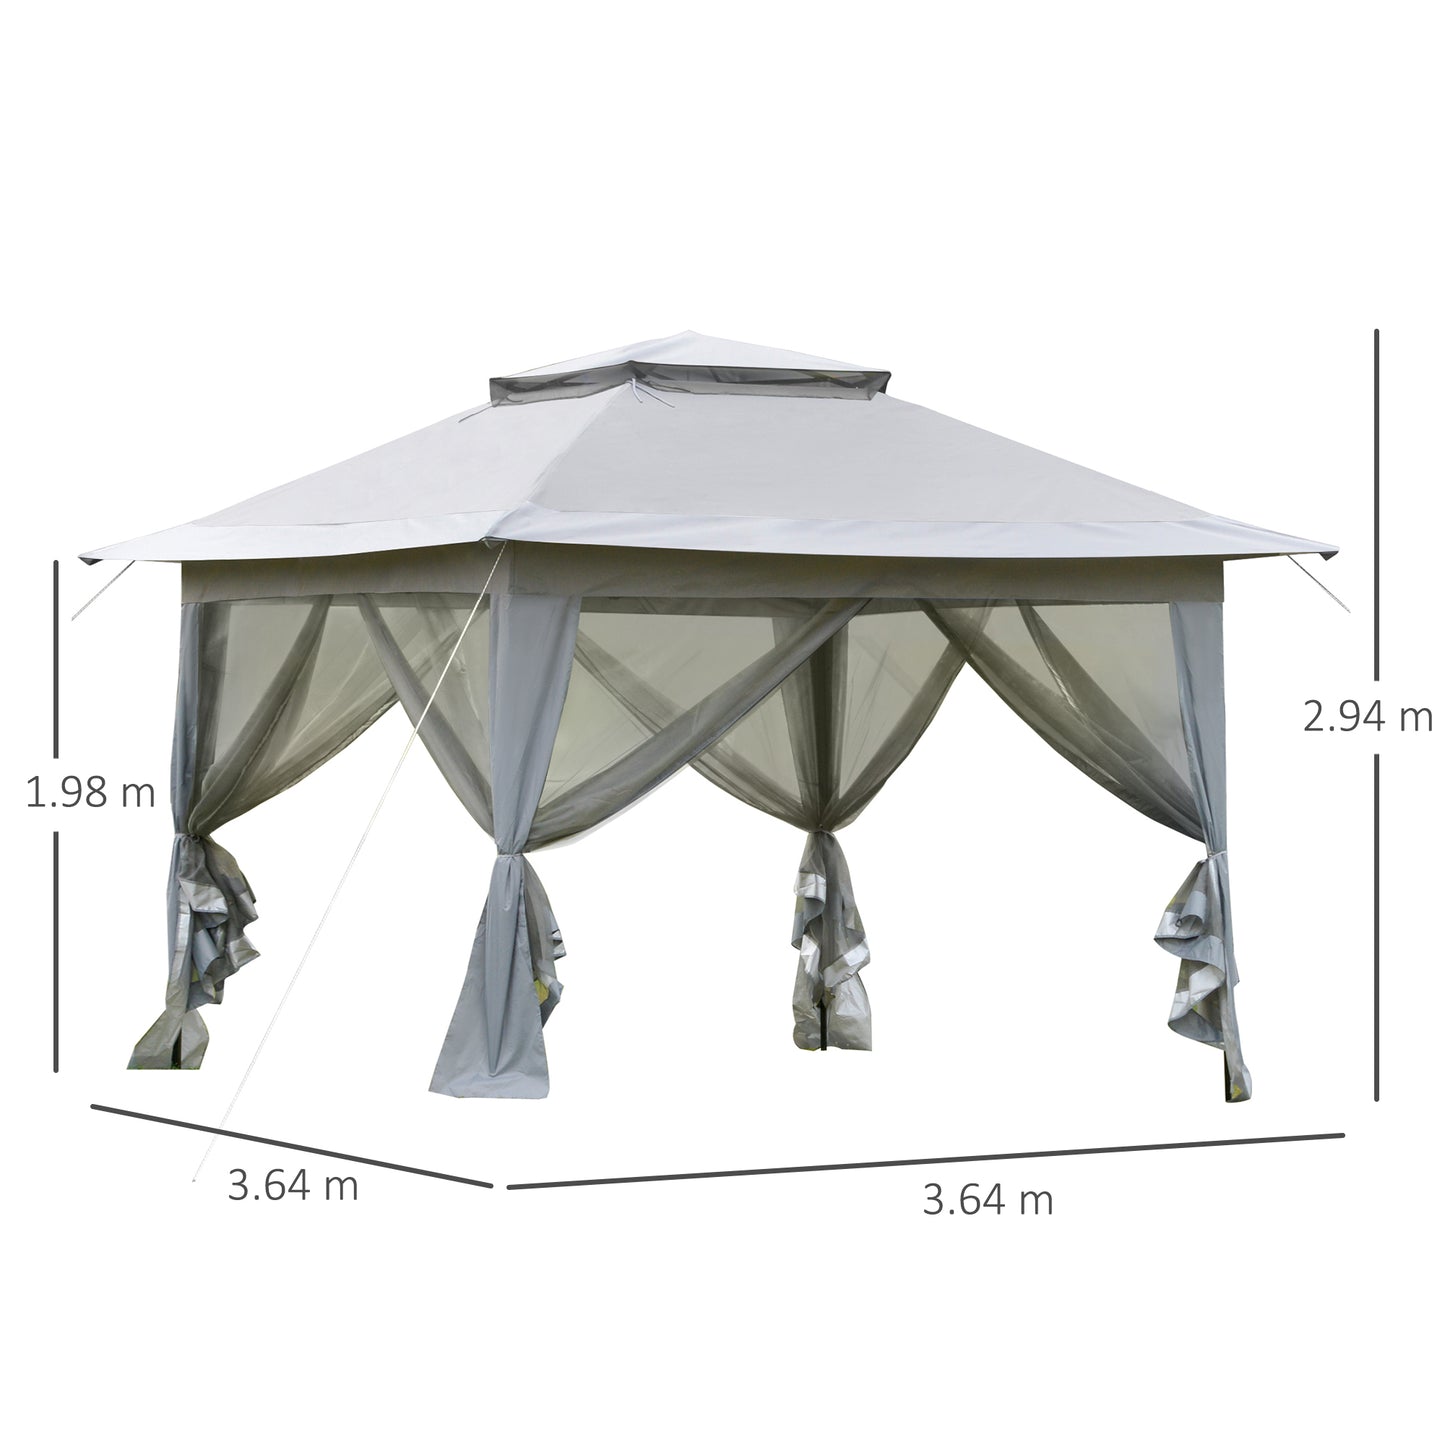 Outsunny Foldable Pop-up Party Tent Instant Canopy Sun Shade Gazebo Shelter Steel Frame Oxford w/ Roller Bag, 3.6 x 3.6 x 2.9(m)